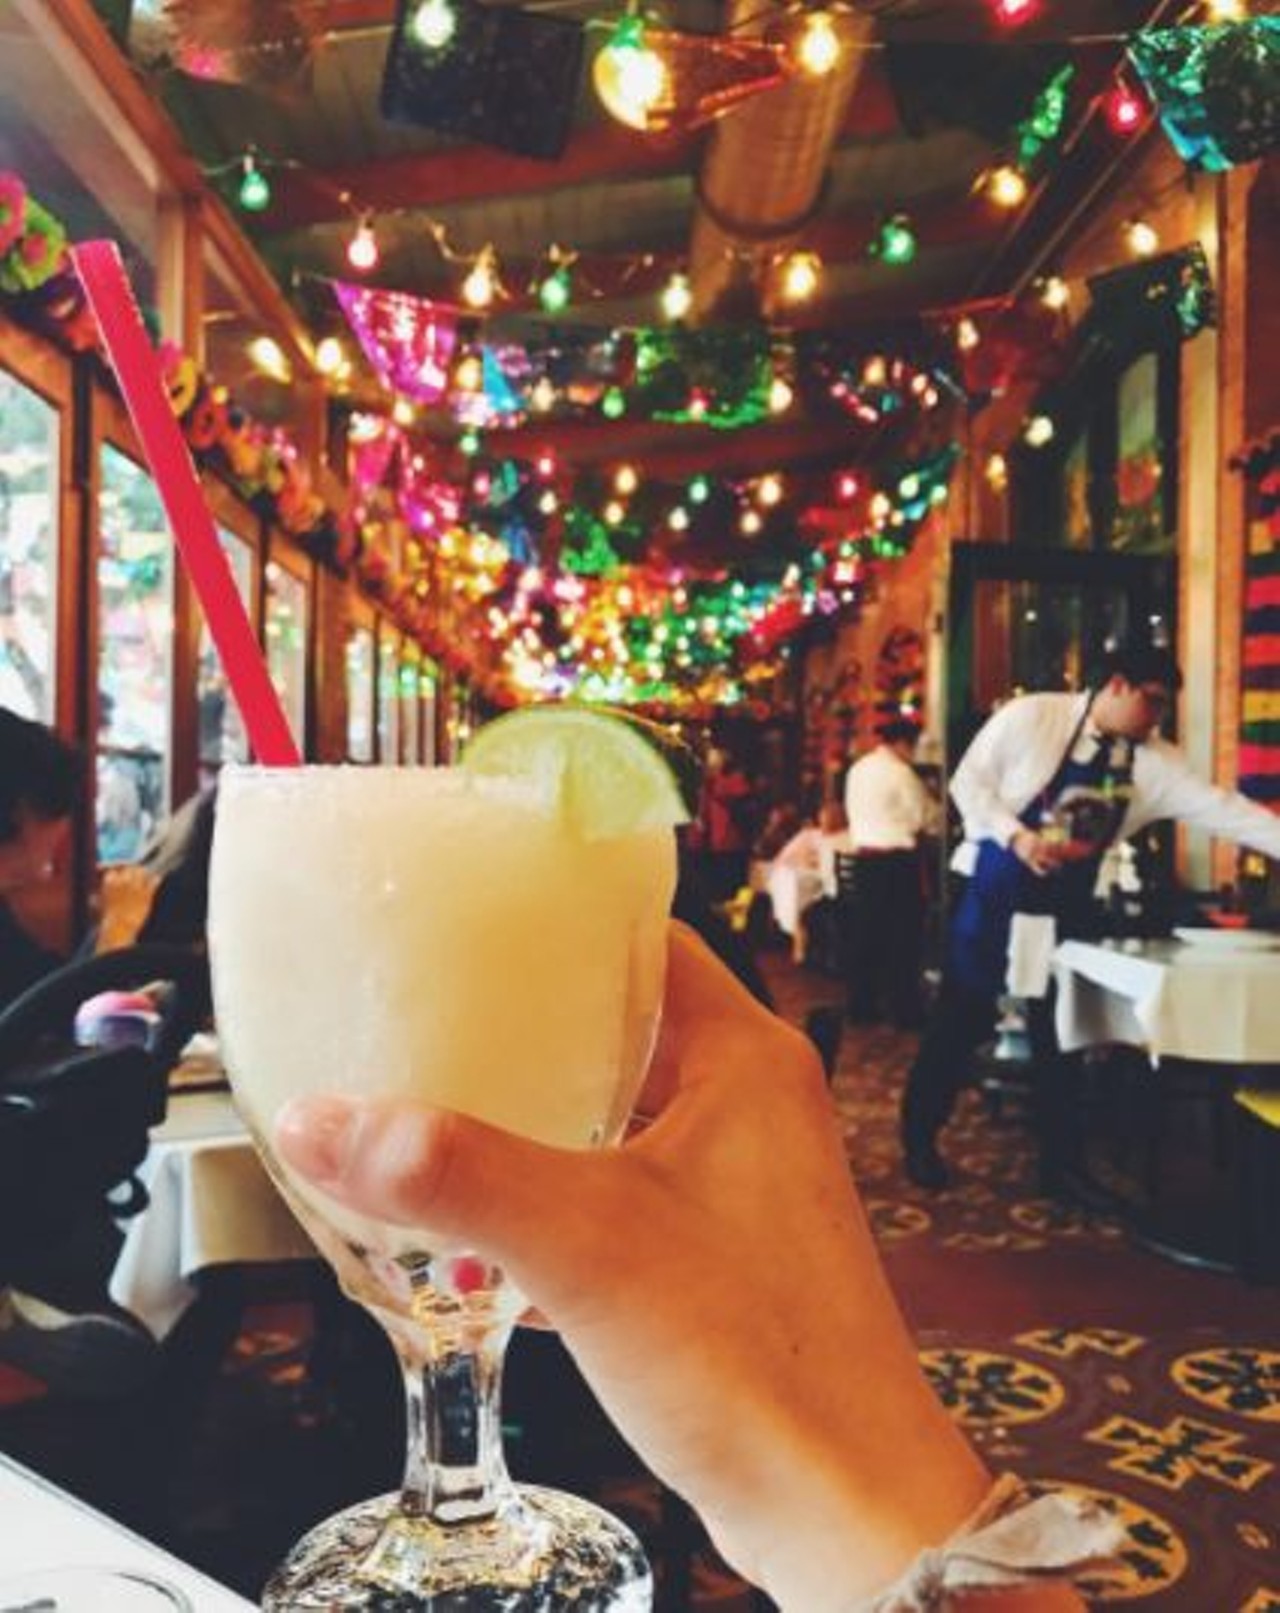 Mi Tierra Cafe y Panaderia 
218 Produce Row, (210) 225-1262
You&#146;ll have a fun time drinking an award-winning margarita in this festive restaurant. Pinatas hanging from the ceilings, a delicious panaderia and amazing margaritas make Mi Tierra a must.
Photo via Instagram, tkauff.art